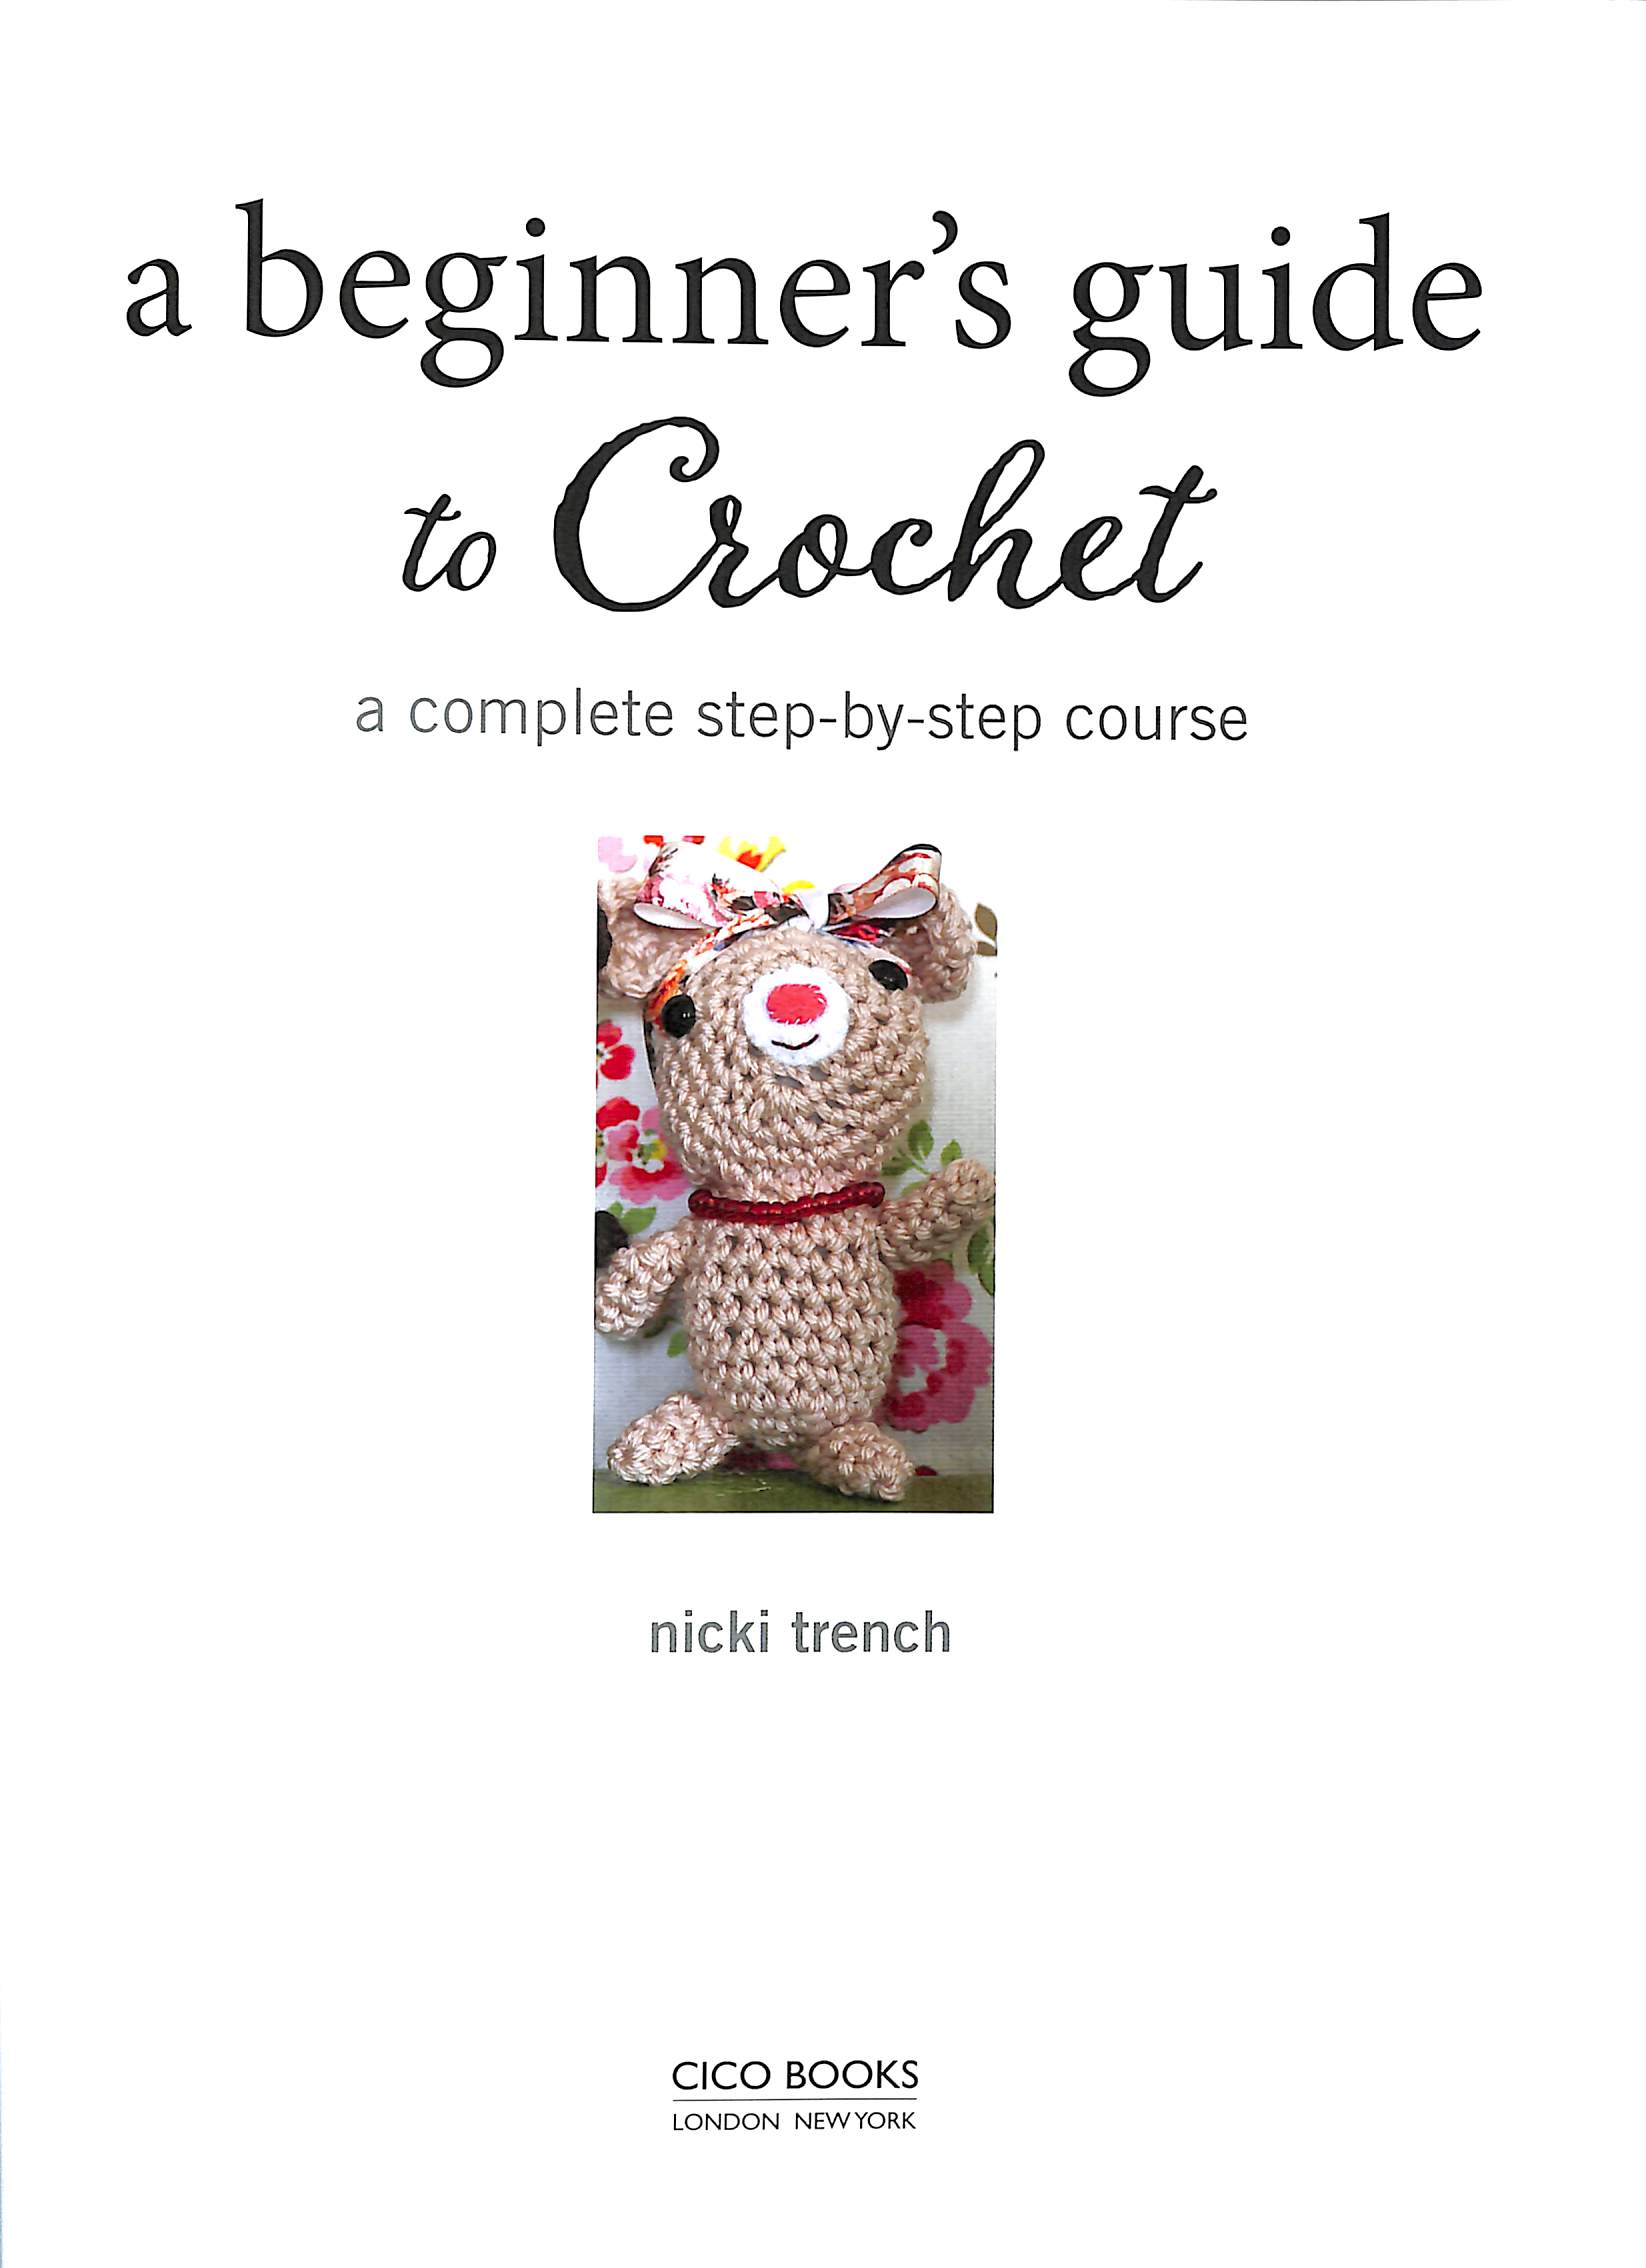 The Beginner's Guide to Crochet - by Claire Montgomerie (Paperback)